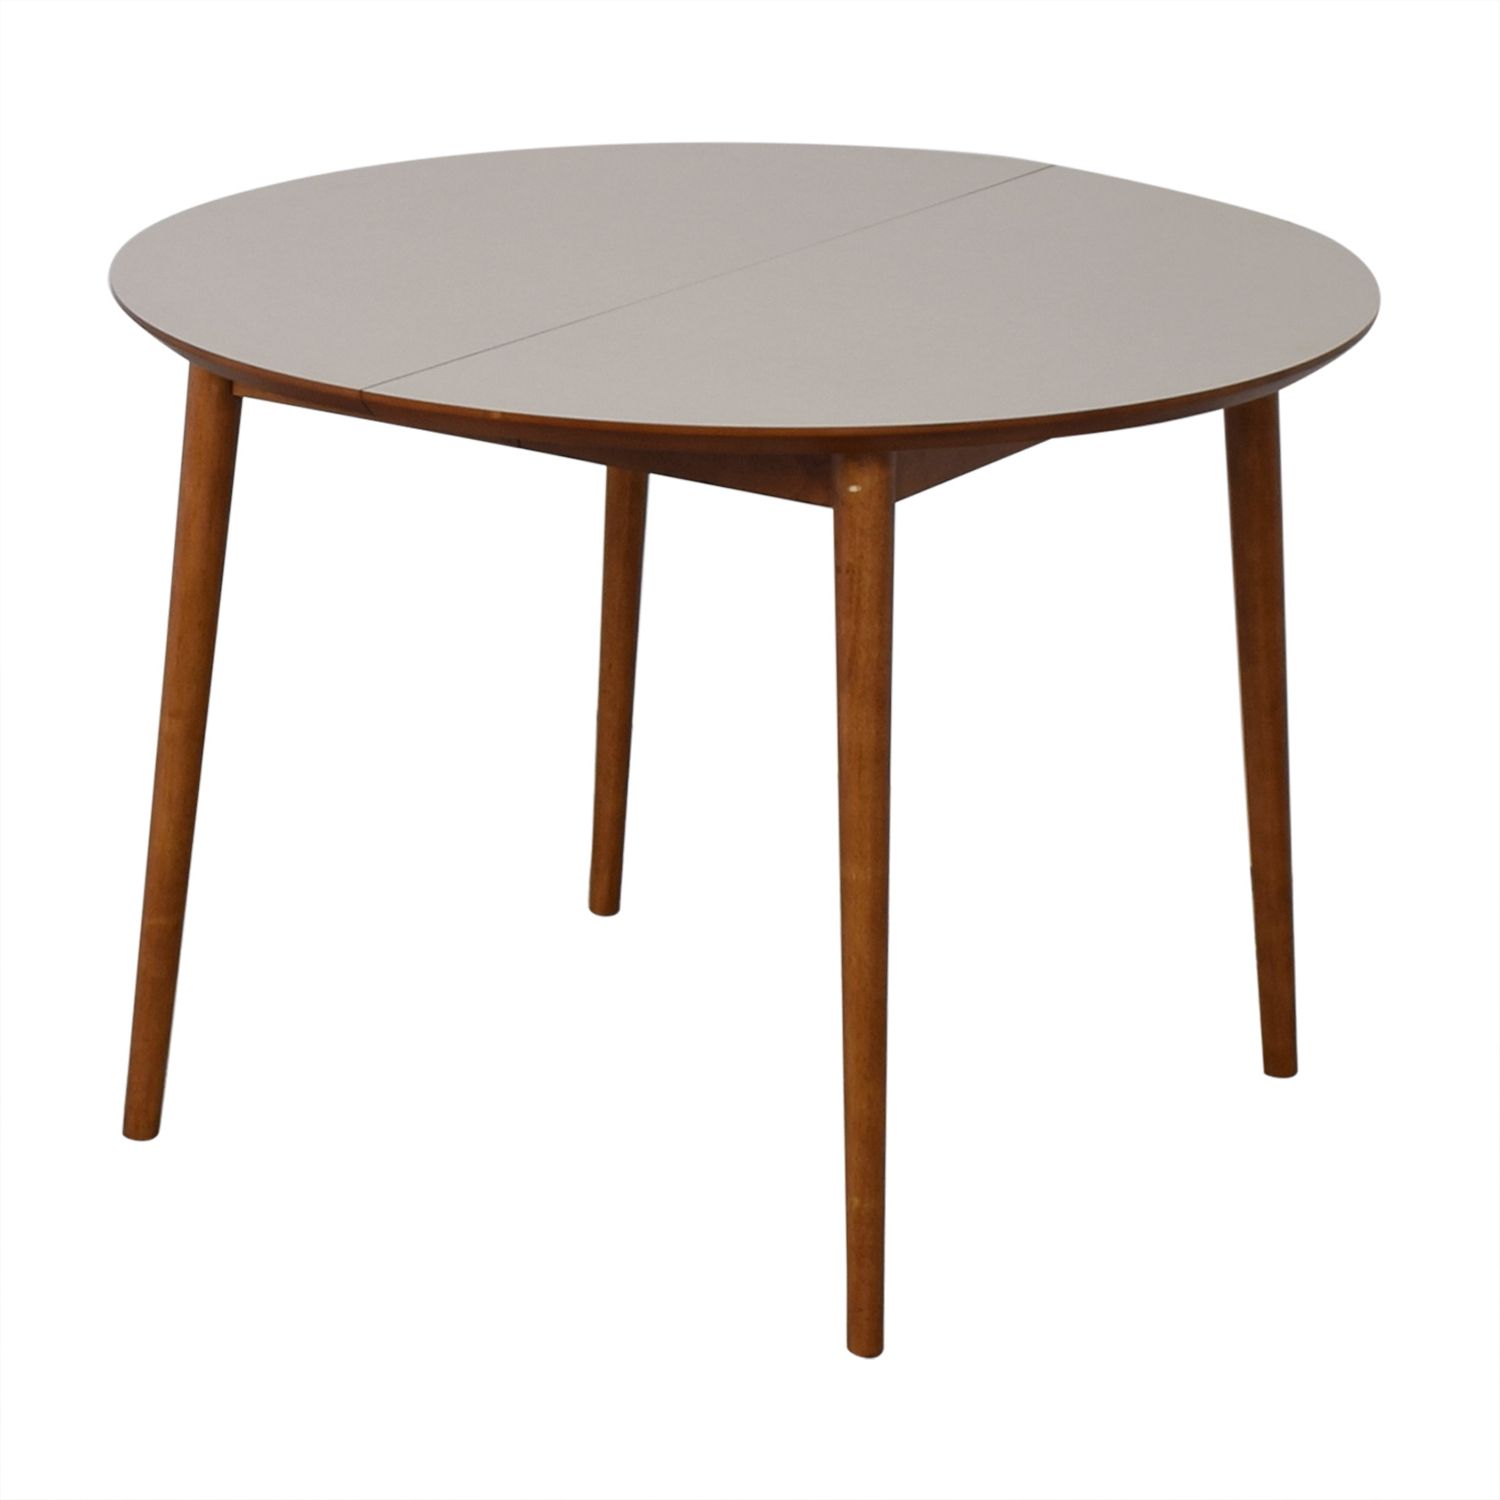 [%49% Off – West Elm West Elm Fishs Eddy Expandable Dining Within Widely Used 49'' Dining Tables|49'' Dining Tables In Newest 49% Off – West Elm West Elm Fishs Eddy Expandable Dining|recent 49'' Dining Tables With Regard To 49% Off – West Elm West Elm Fishs Eddy Expandable Dining|popular 49% Off – West Elm West Elm Fishs Eddy Expandable Dining Regarding 49'' Dining Tables%] (View 16 of 20)